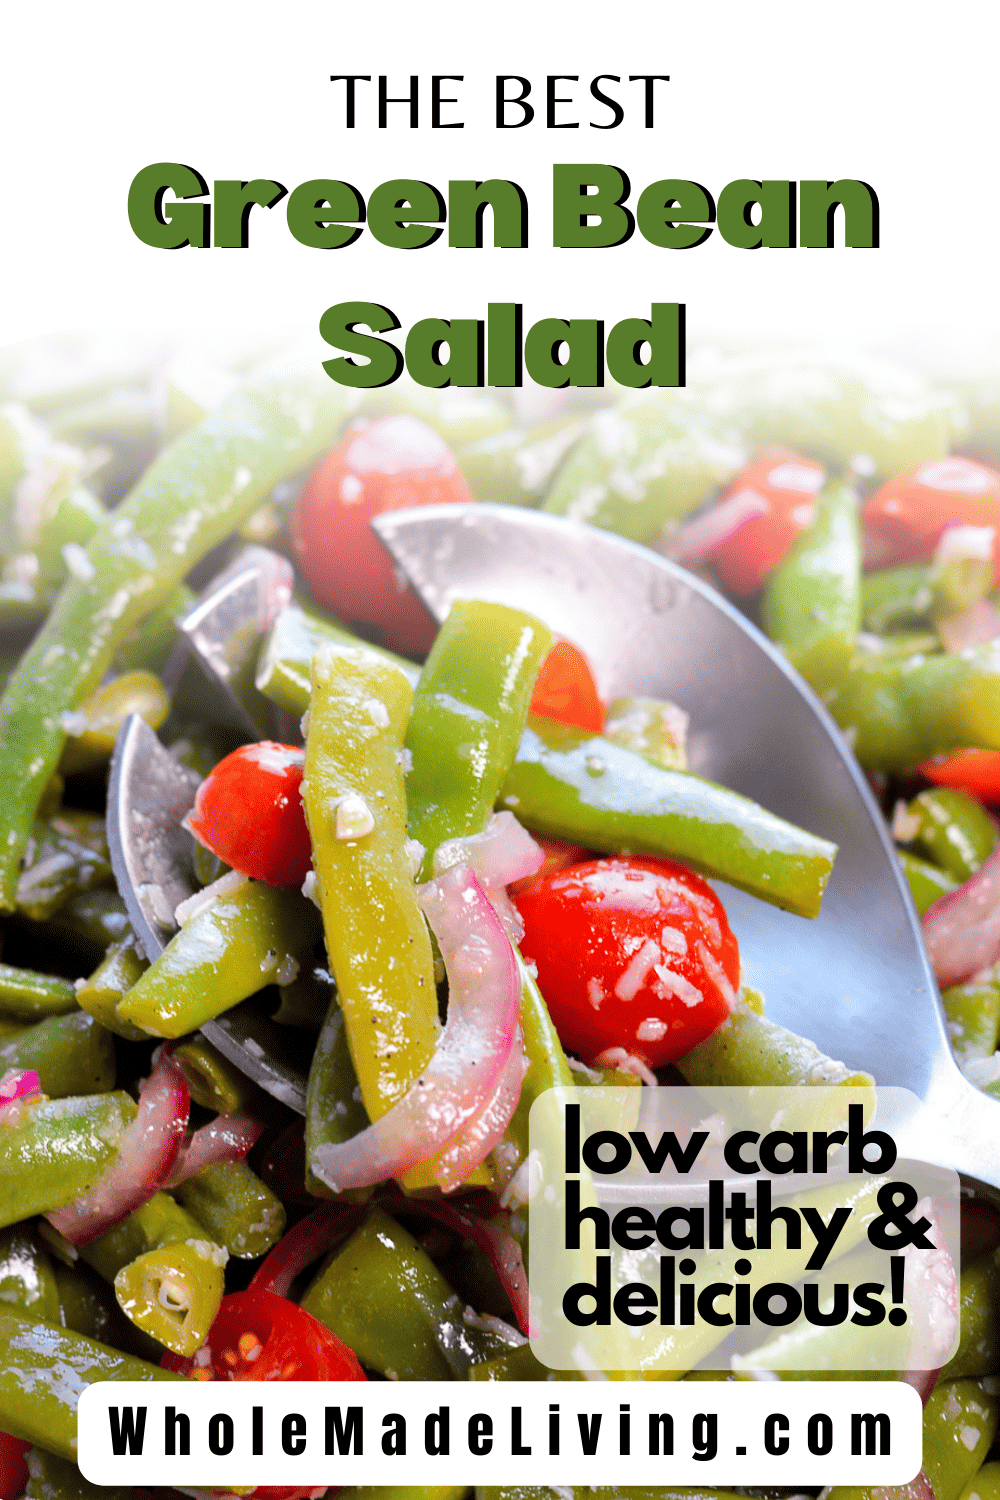 The Best Green Bean Salad , low carb, healthy & delicious Pinterest Pin